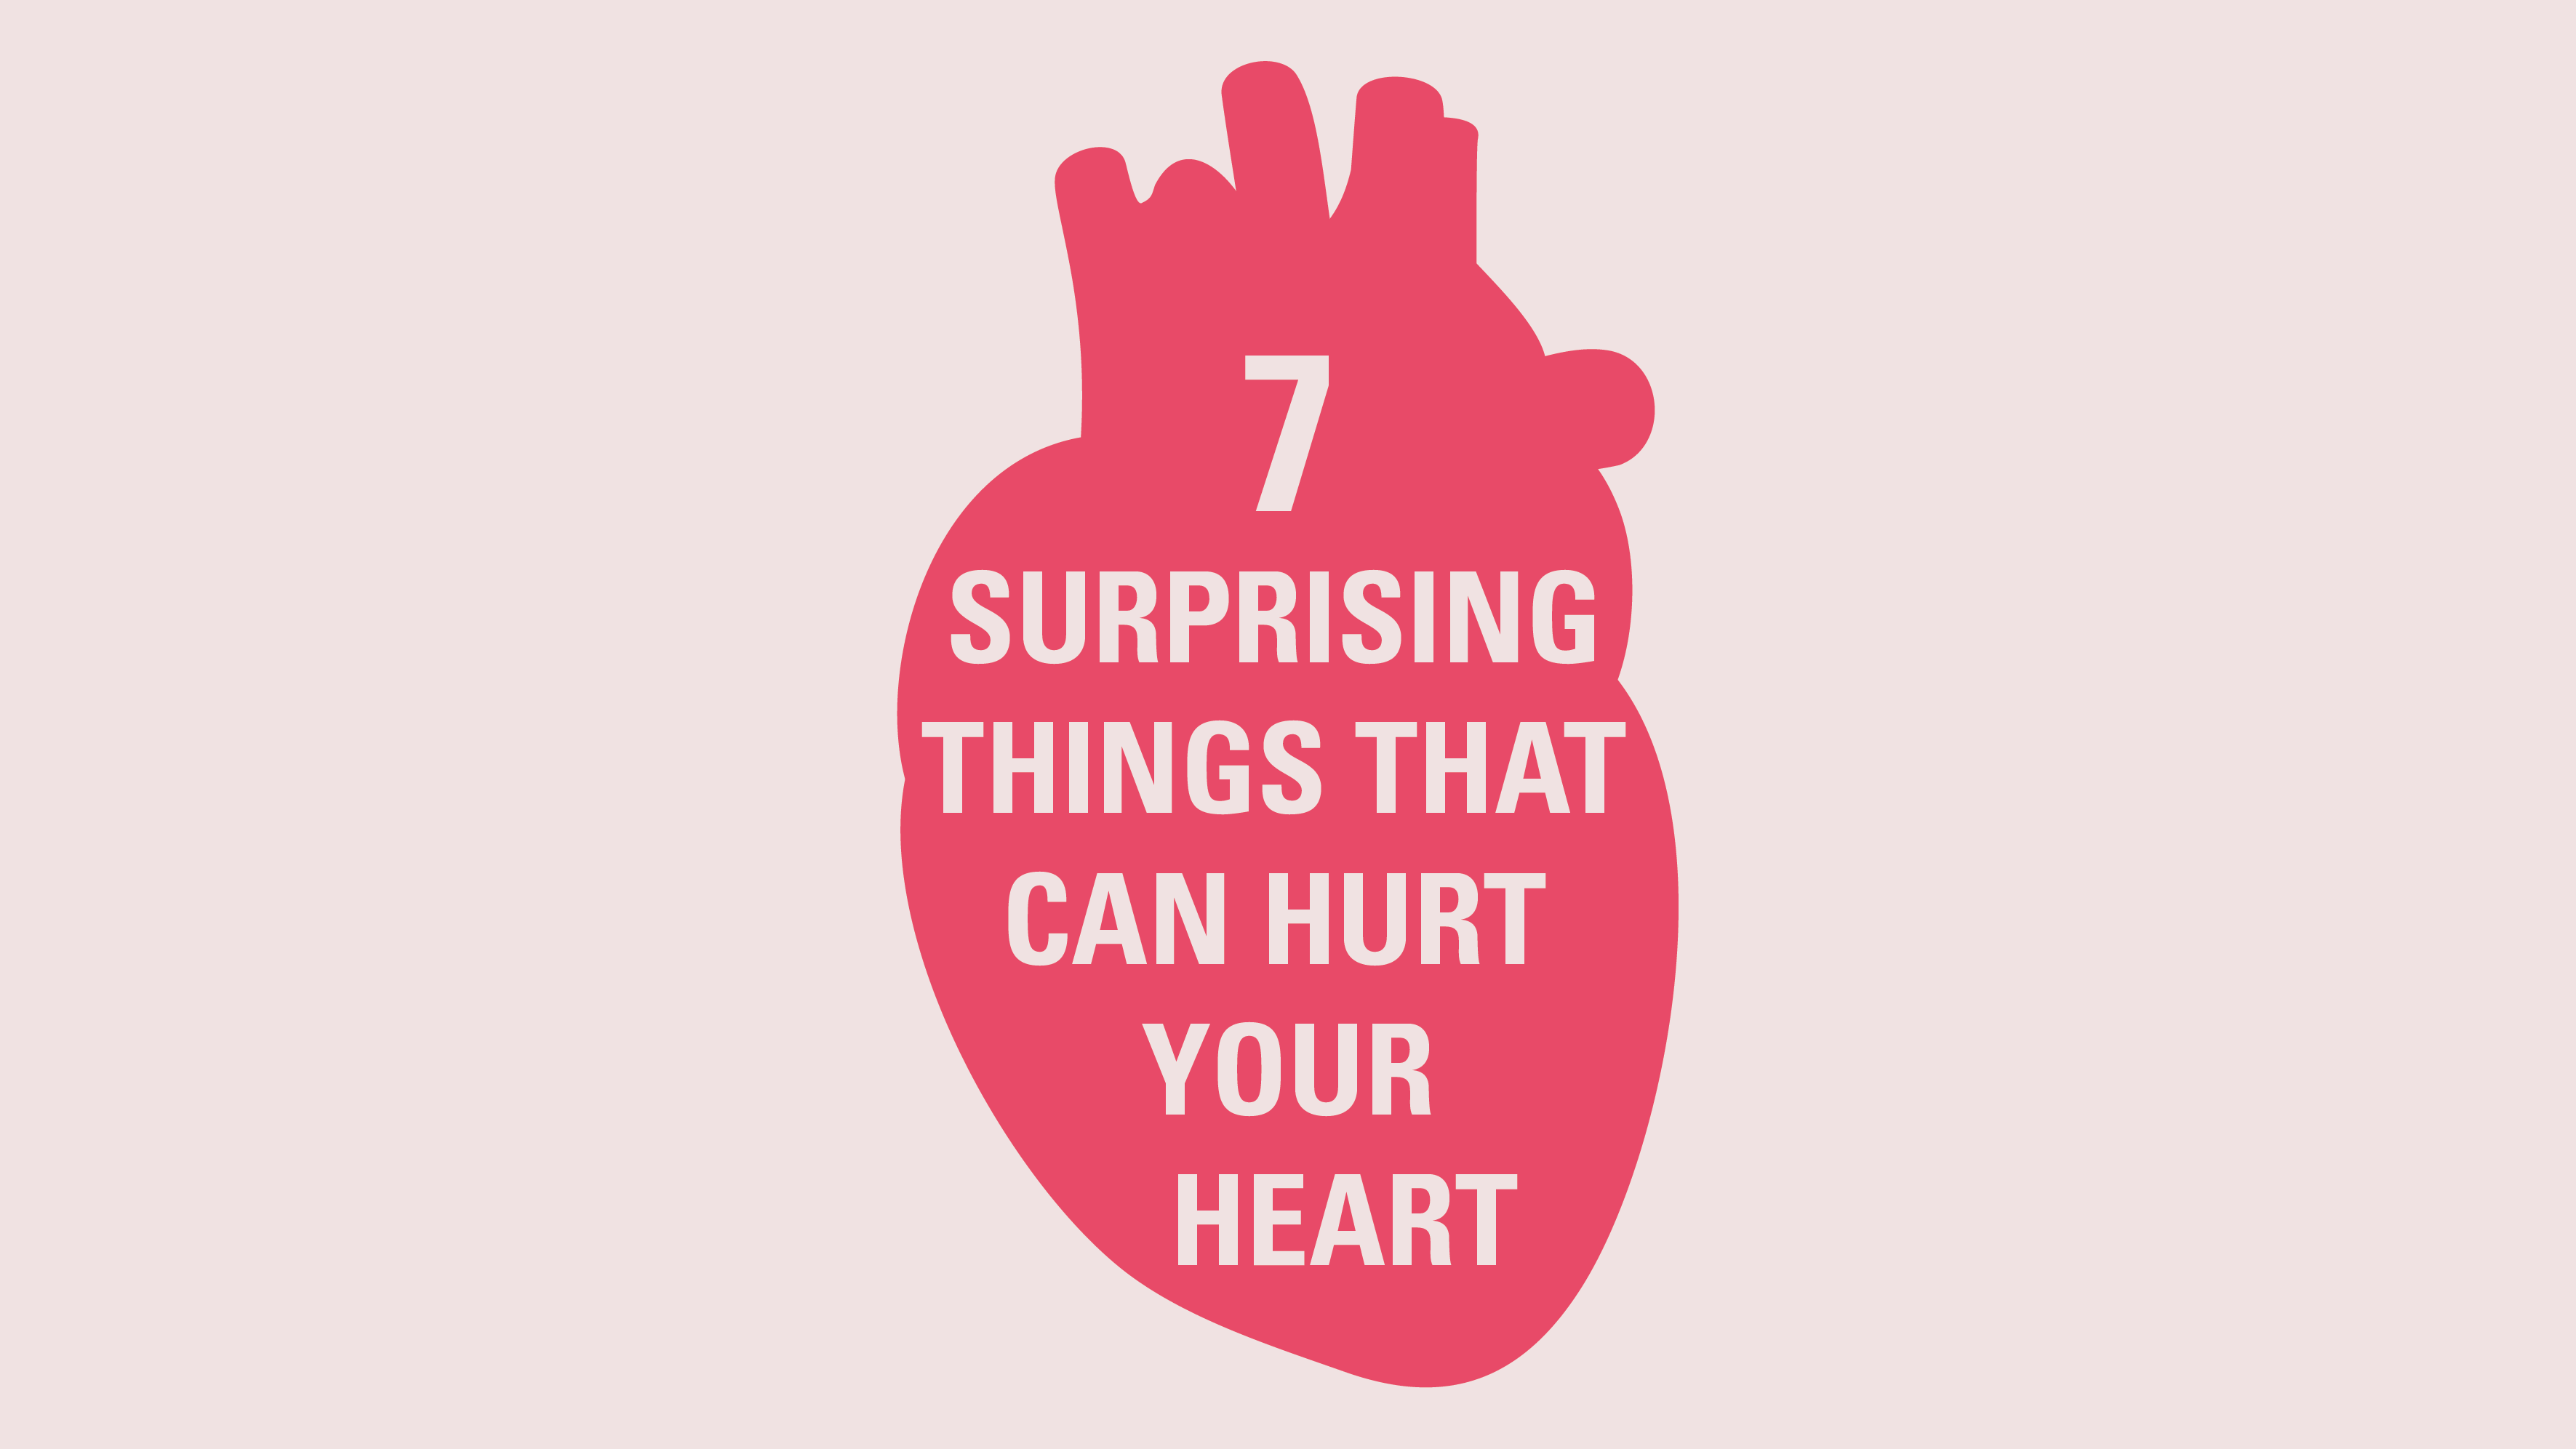 Heart Health Logo - Unexpected Heart Disease Factors: 7 Surprising Things That Can Hurt